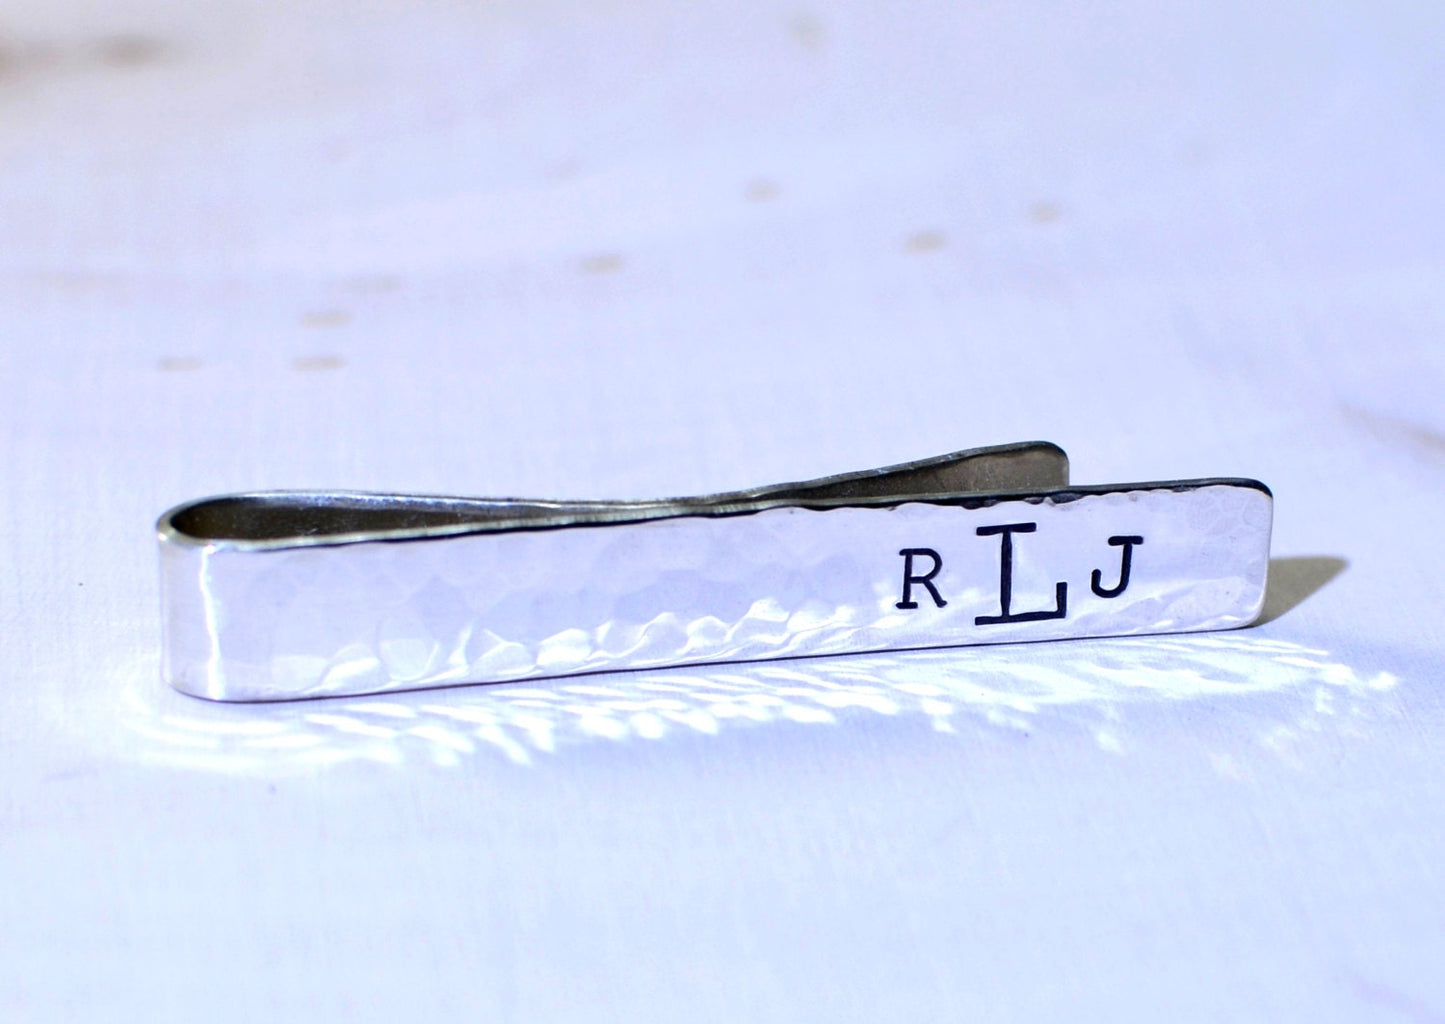 Hammered sterling silver tie clip with personalized monogram on tie bar